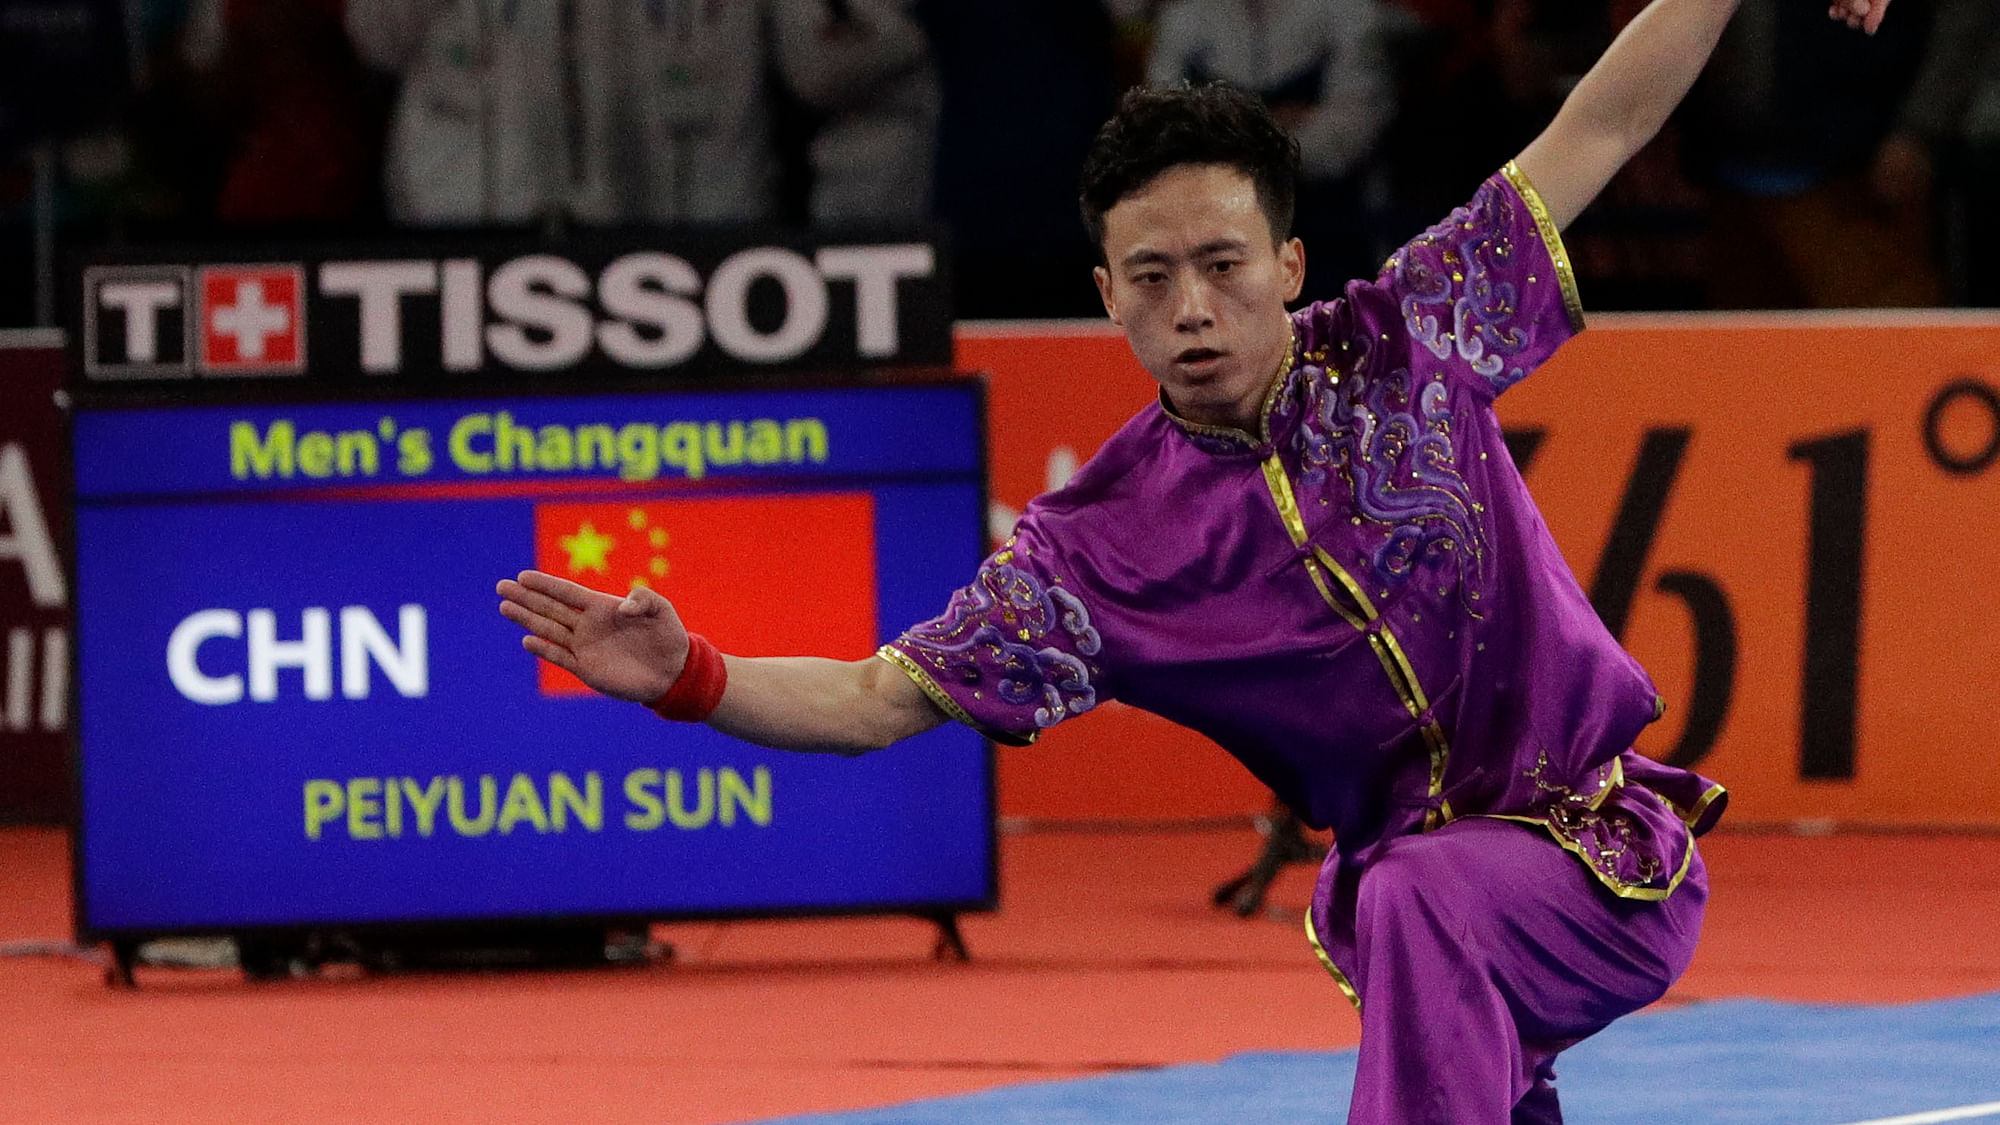 China’s Peiyuan Sun perform during the Wushu games at the 18th Asian Games in Jakarta, Indonesia on Sunday, Aug. 19, 2018. Sun won gold in the event